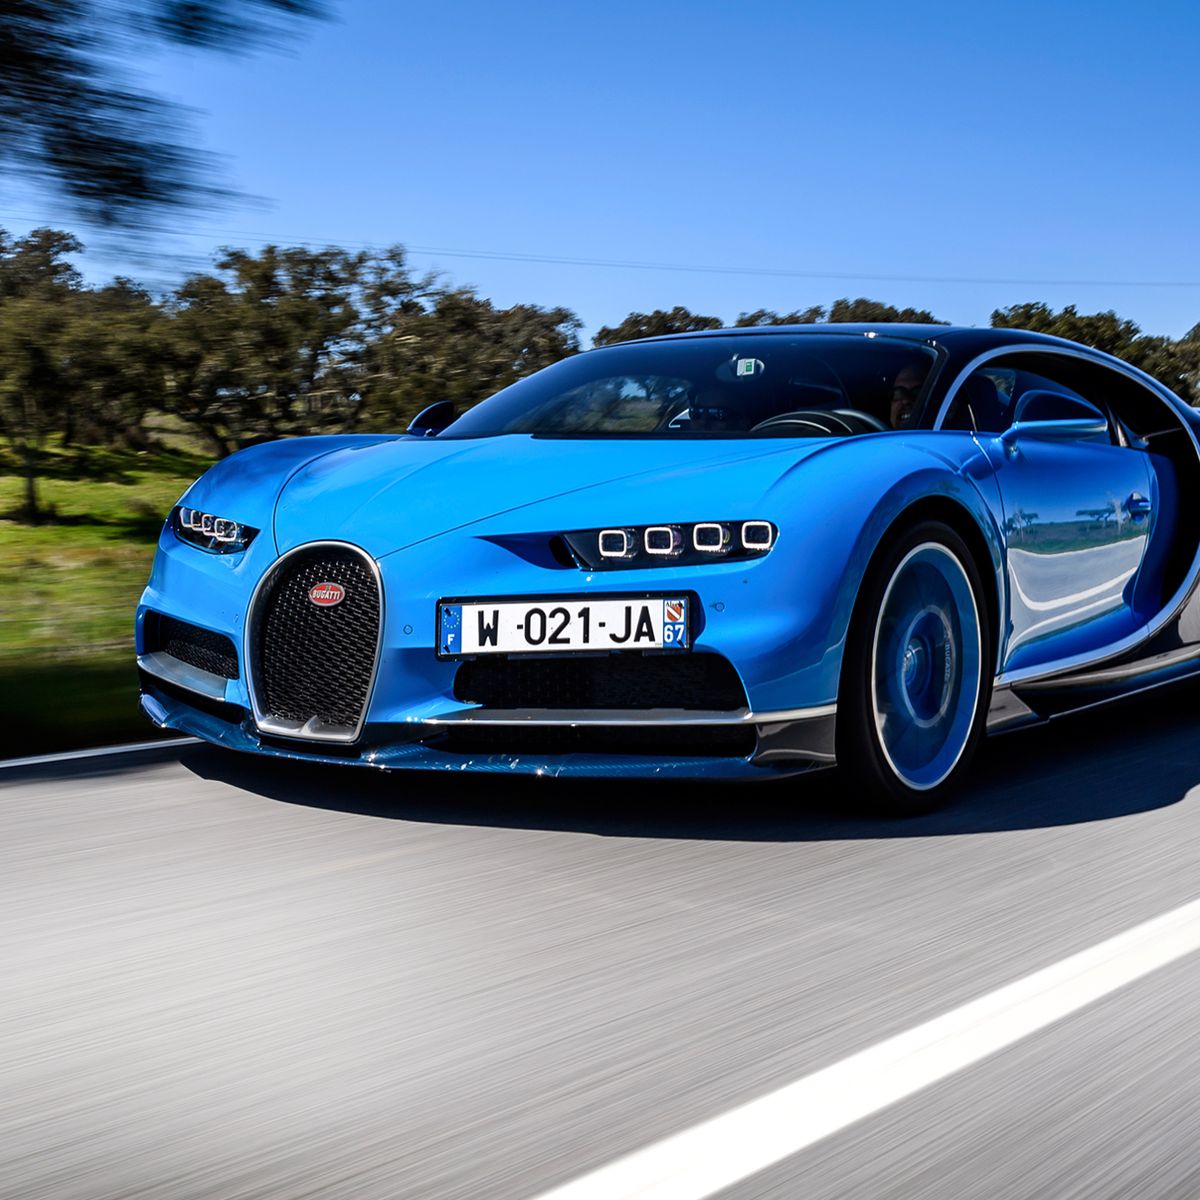 Bugatti has launched an ultra-exclusive range of speakers that are